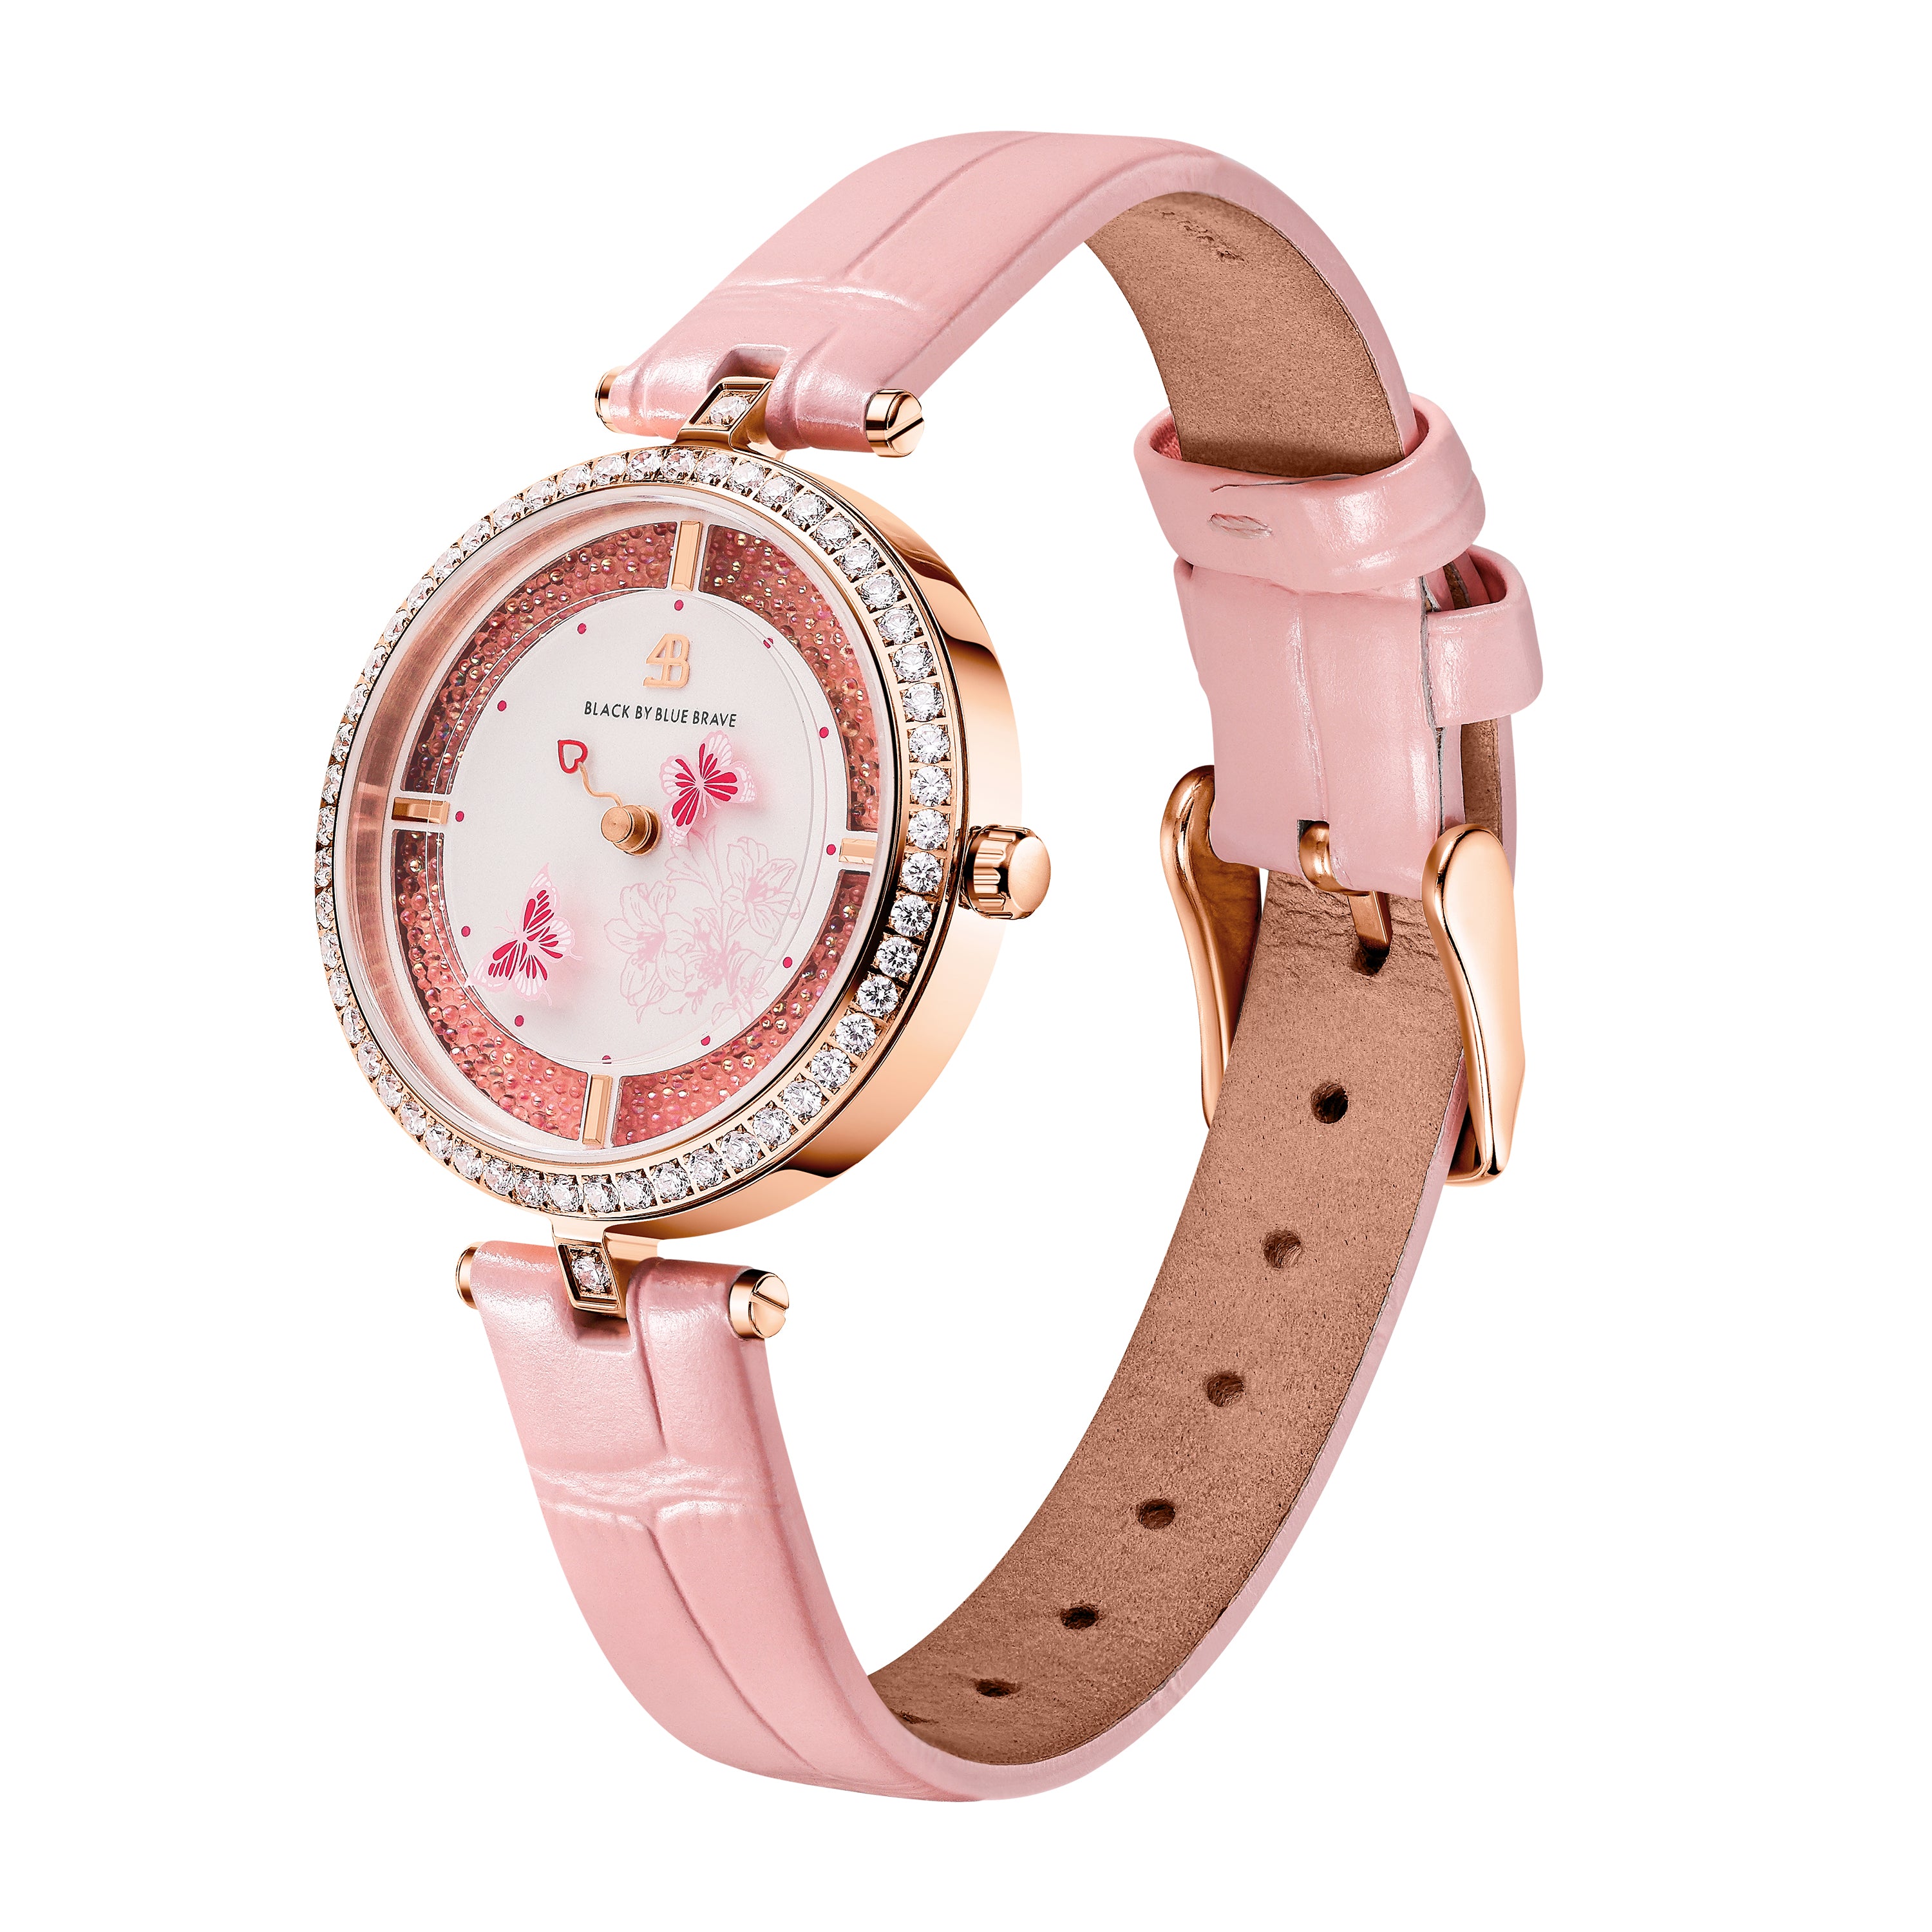 Pink Butterfly Lovers Watch With Flower Ceramic Jewelleries (Earrings, Necklace and Bracelet)